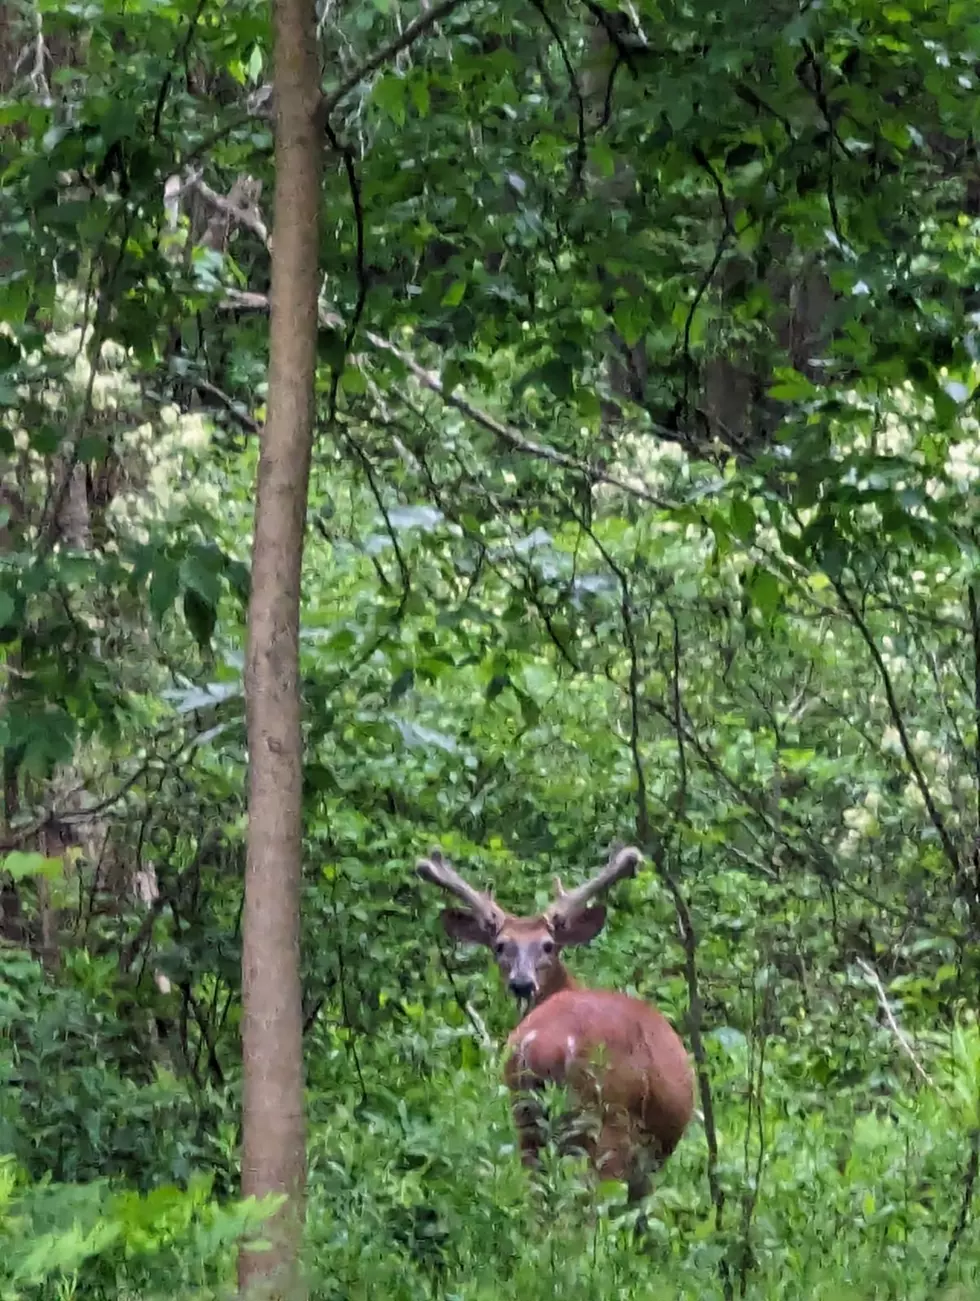 Record Setting Buck Already in New York State?